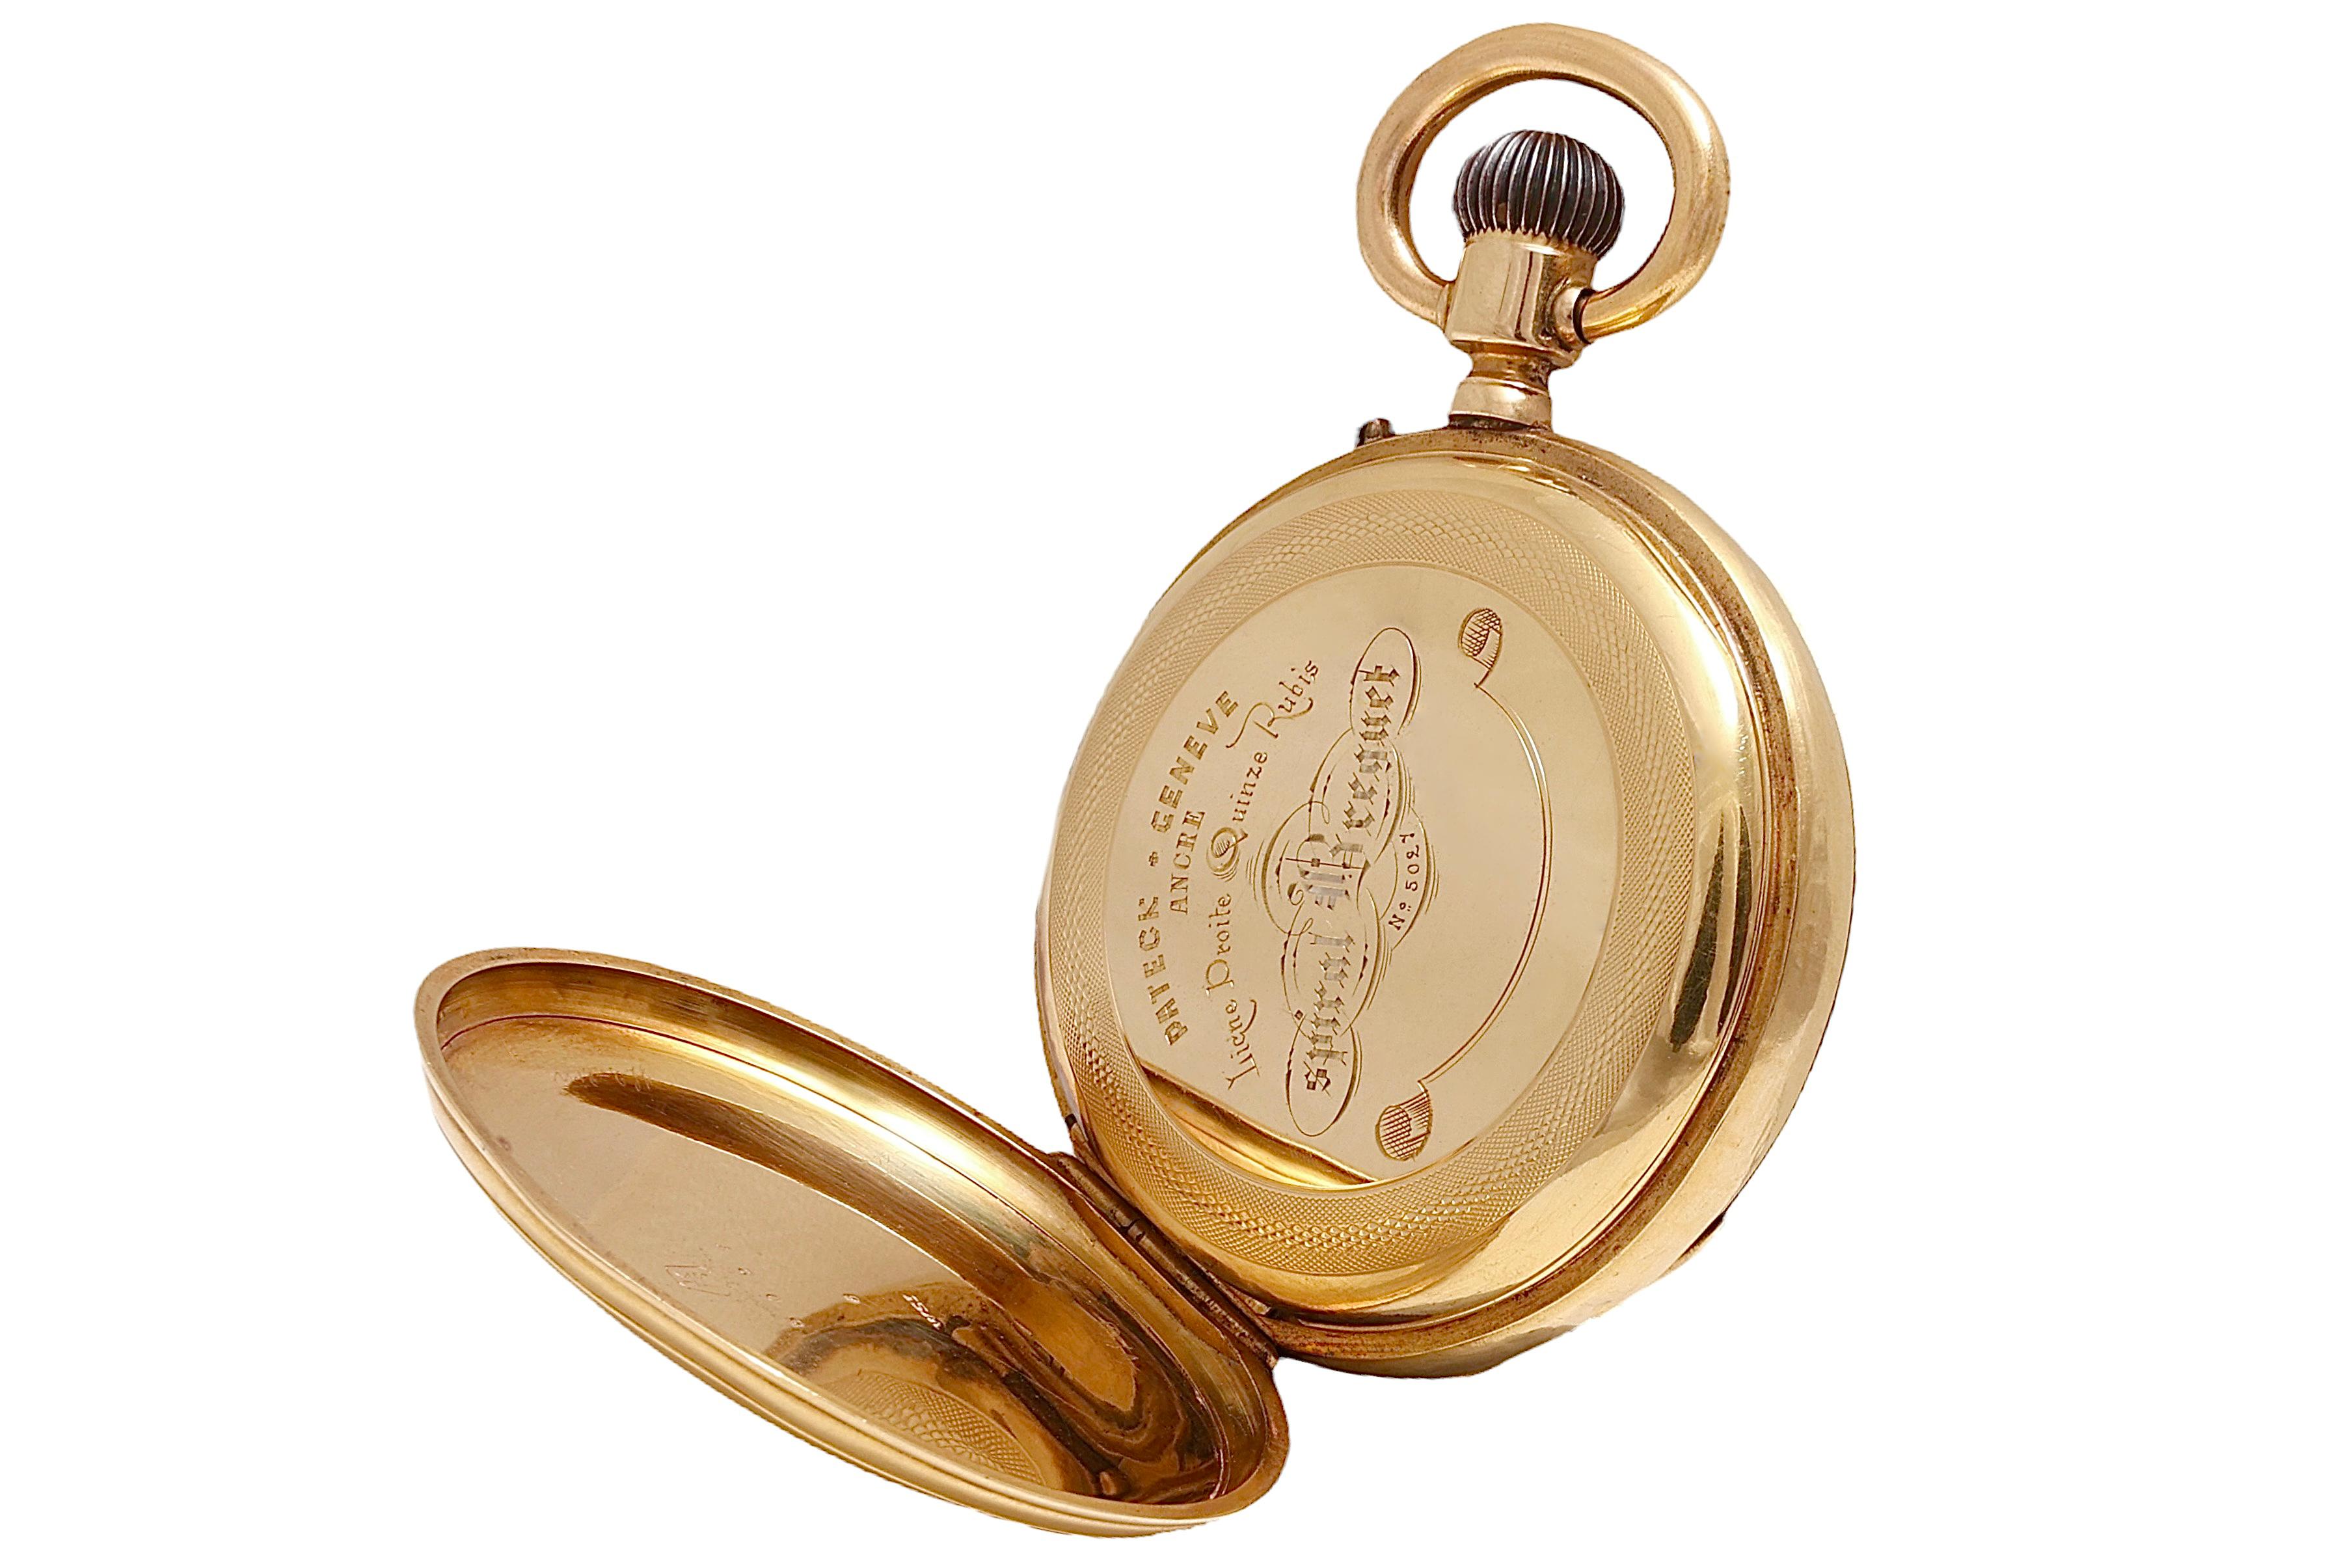 18 Kt Solid Gold Pateck Geneve Spiral Breguet Open Face Pocket Watch In Excellent Condition For Sale In Antwerp, BE